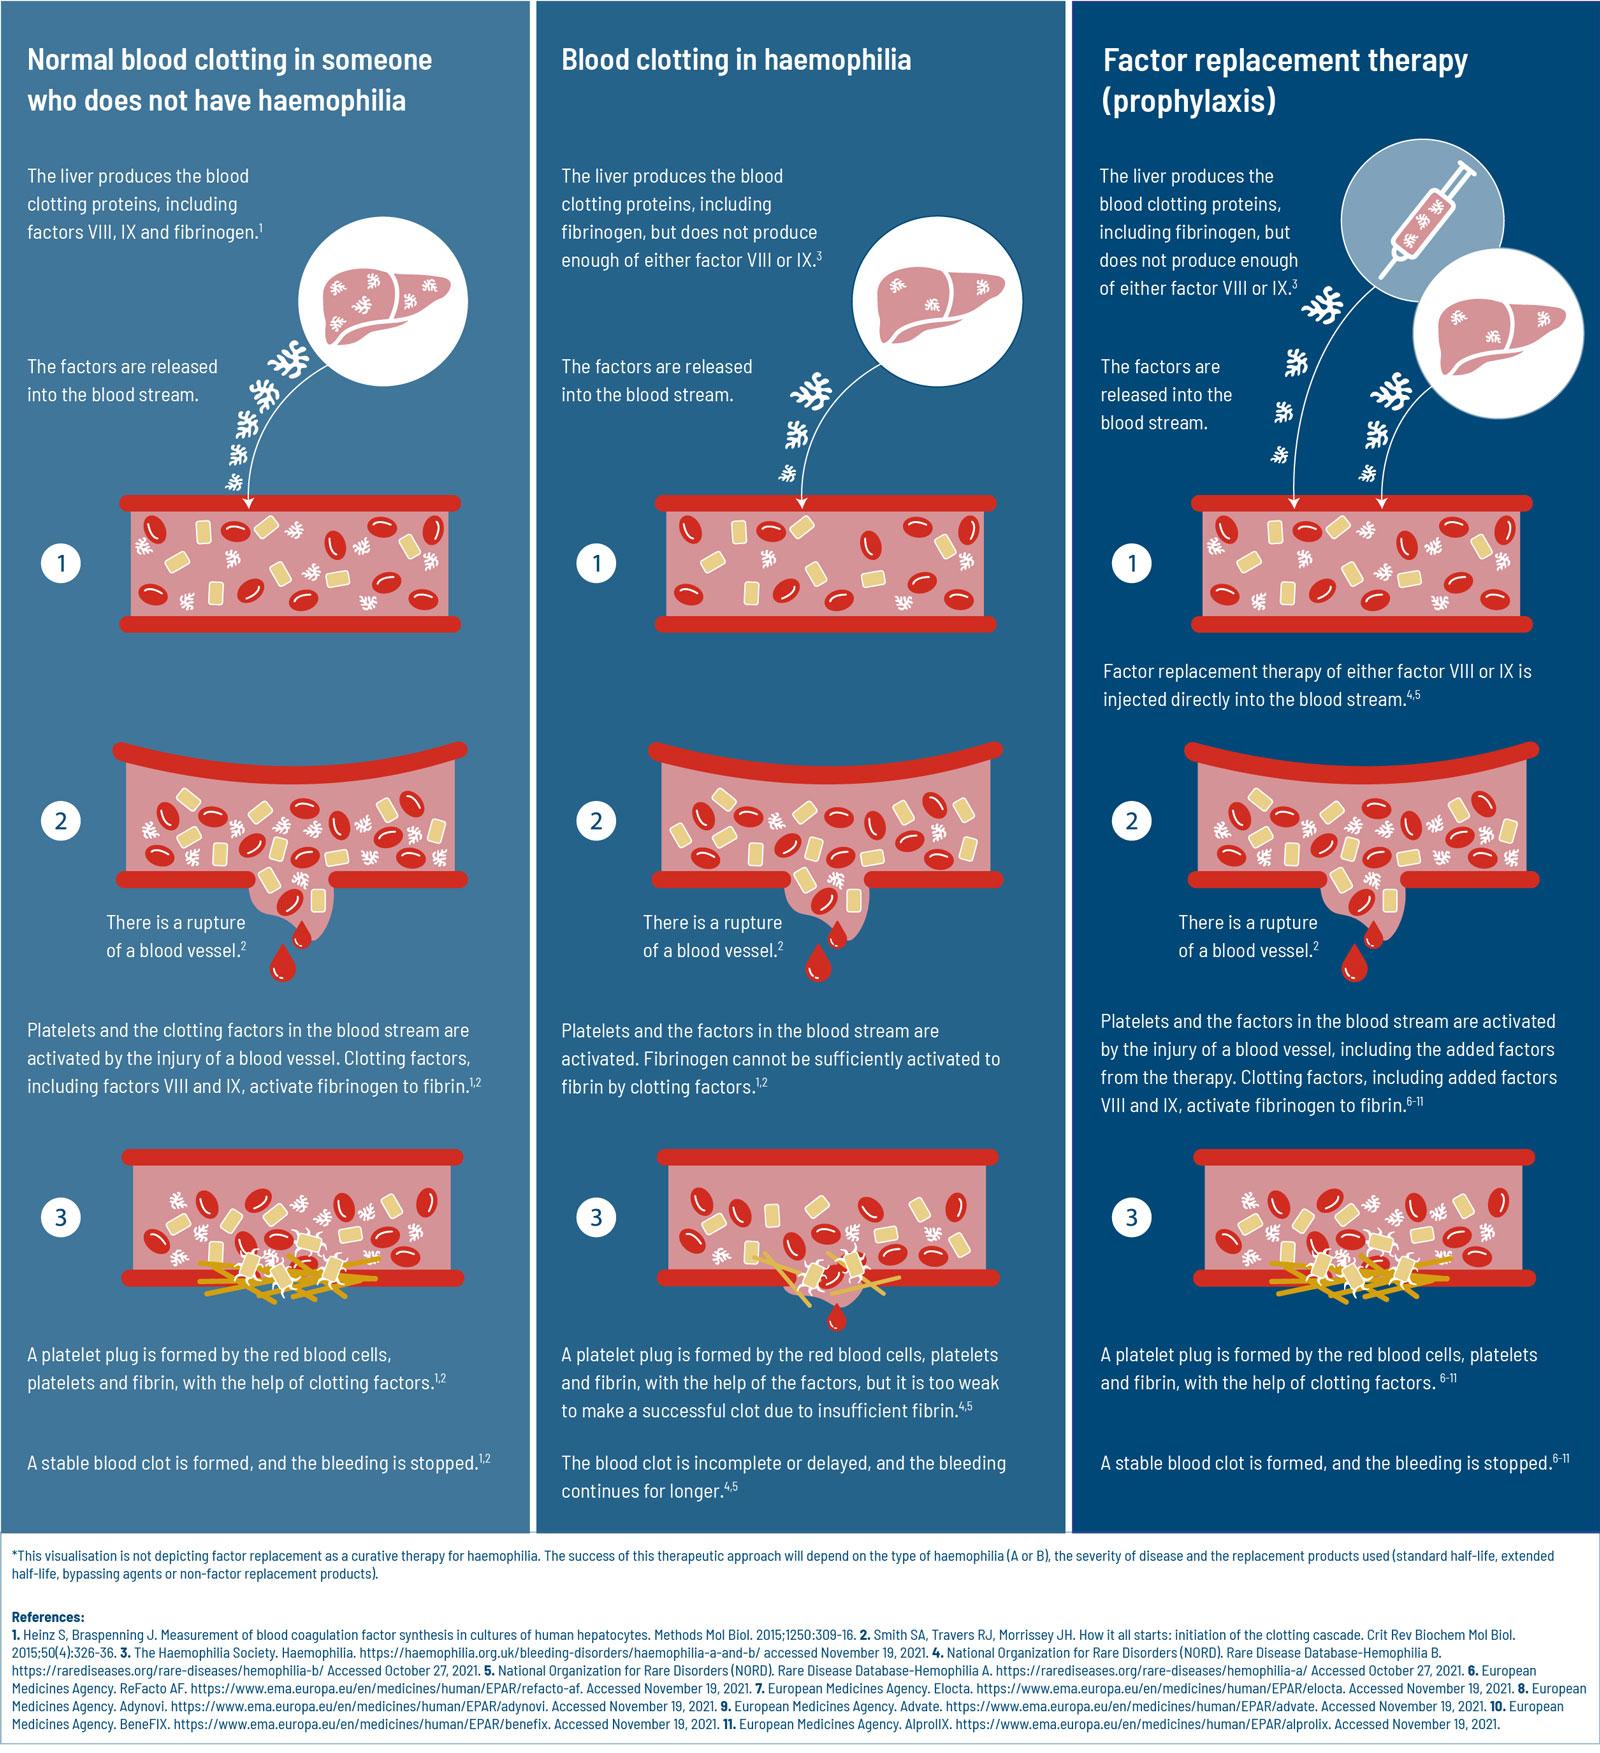 Difference between Normal blood clotting in someone who does not have haemophilia, blood clotting in haemophilia and factor replacement therapy (prophylaxis)